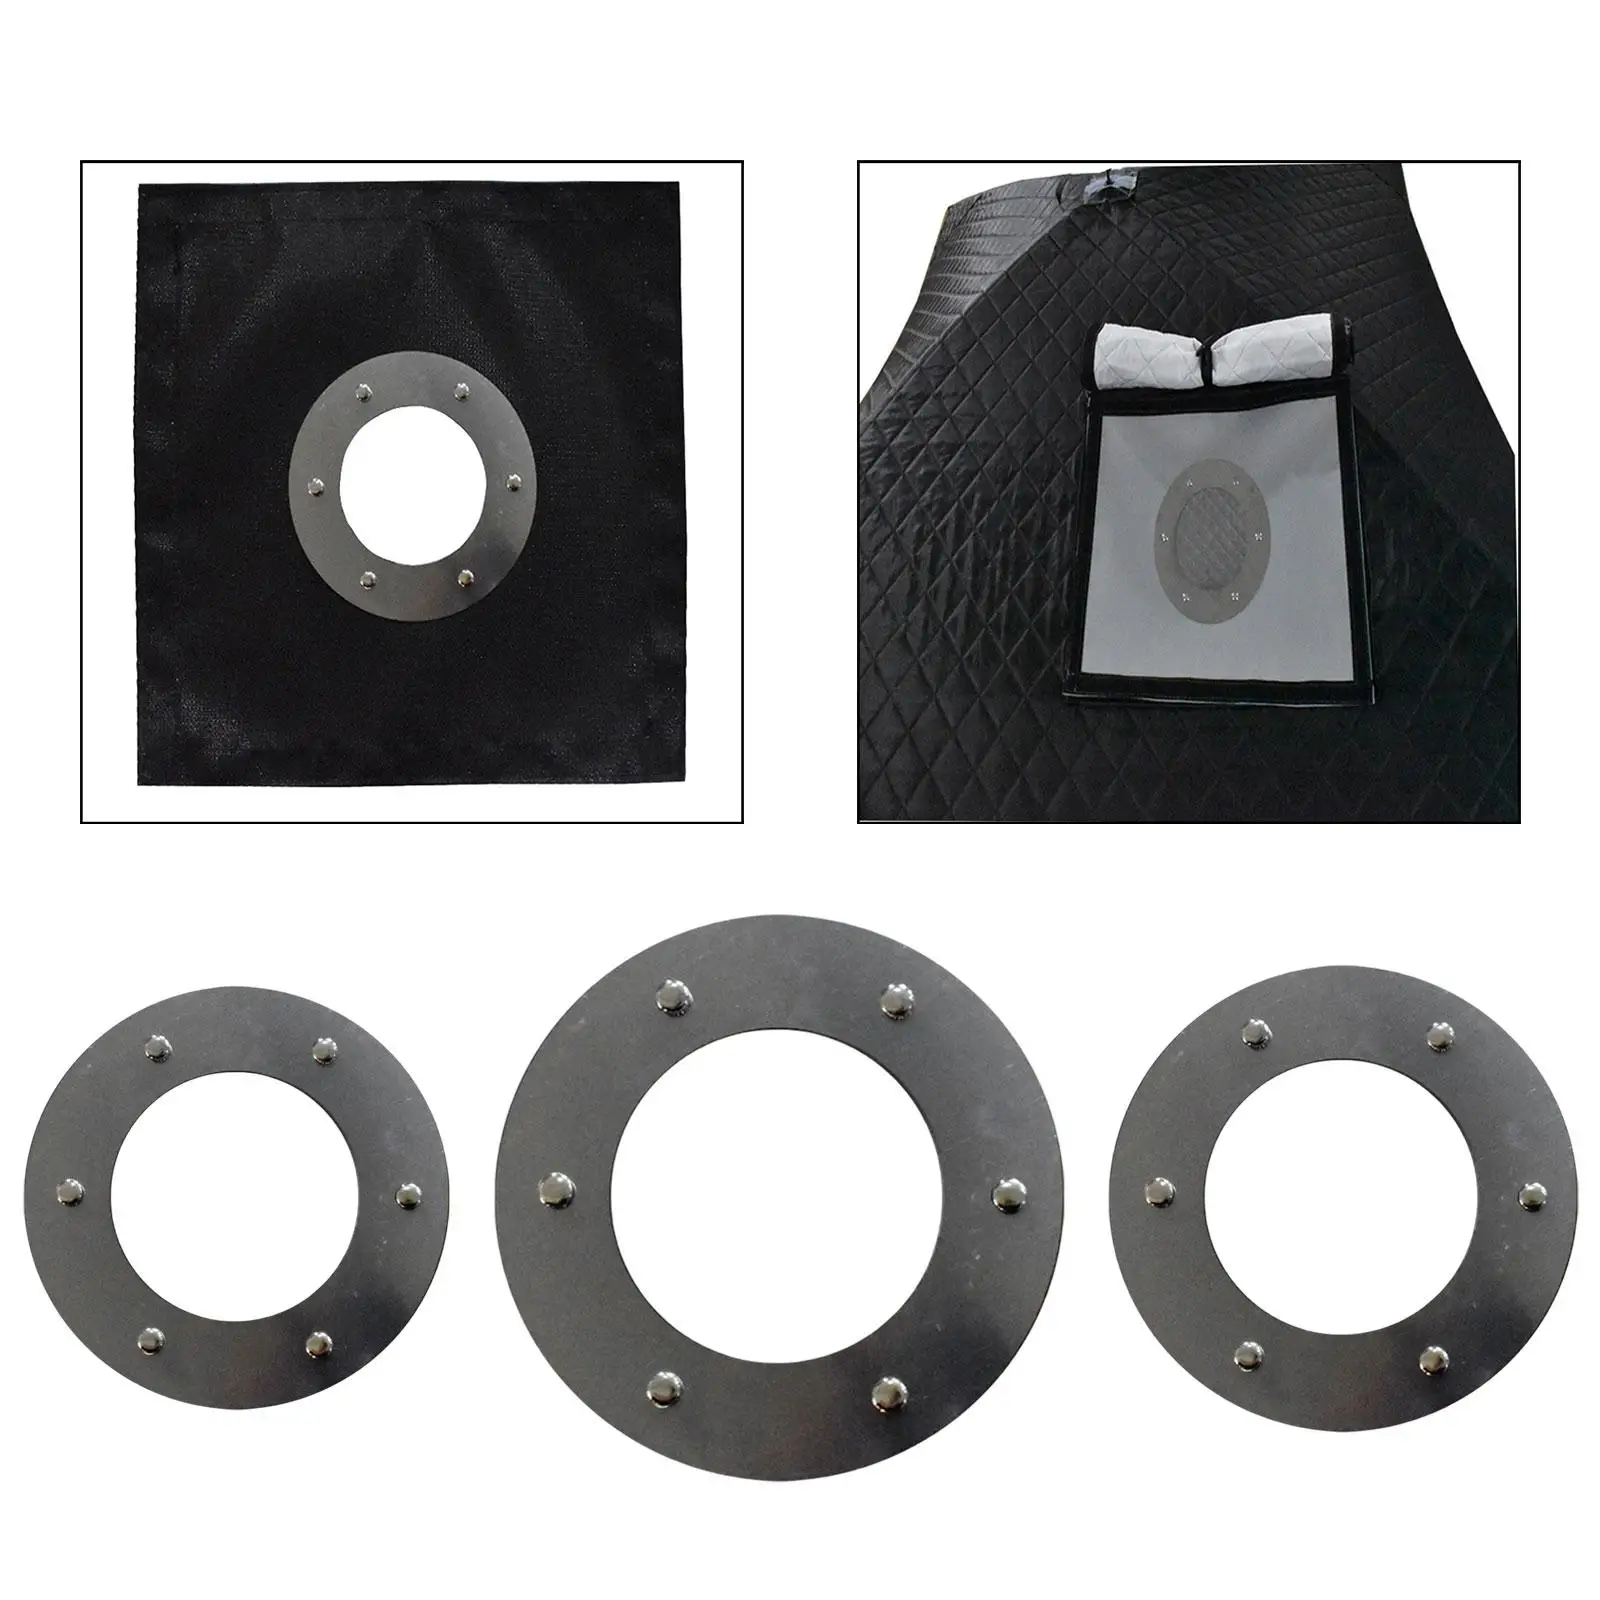 Tent Stove Jack Fire Resistant Pipe Ring Protection Hole Stove Pipe Collar for Firewood Stove